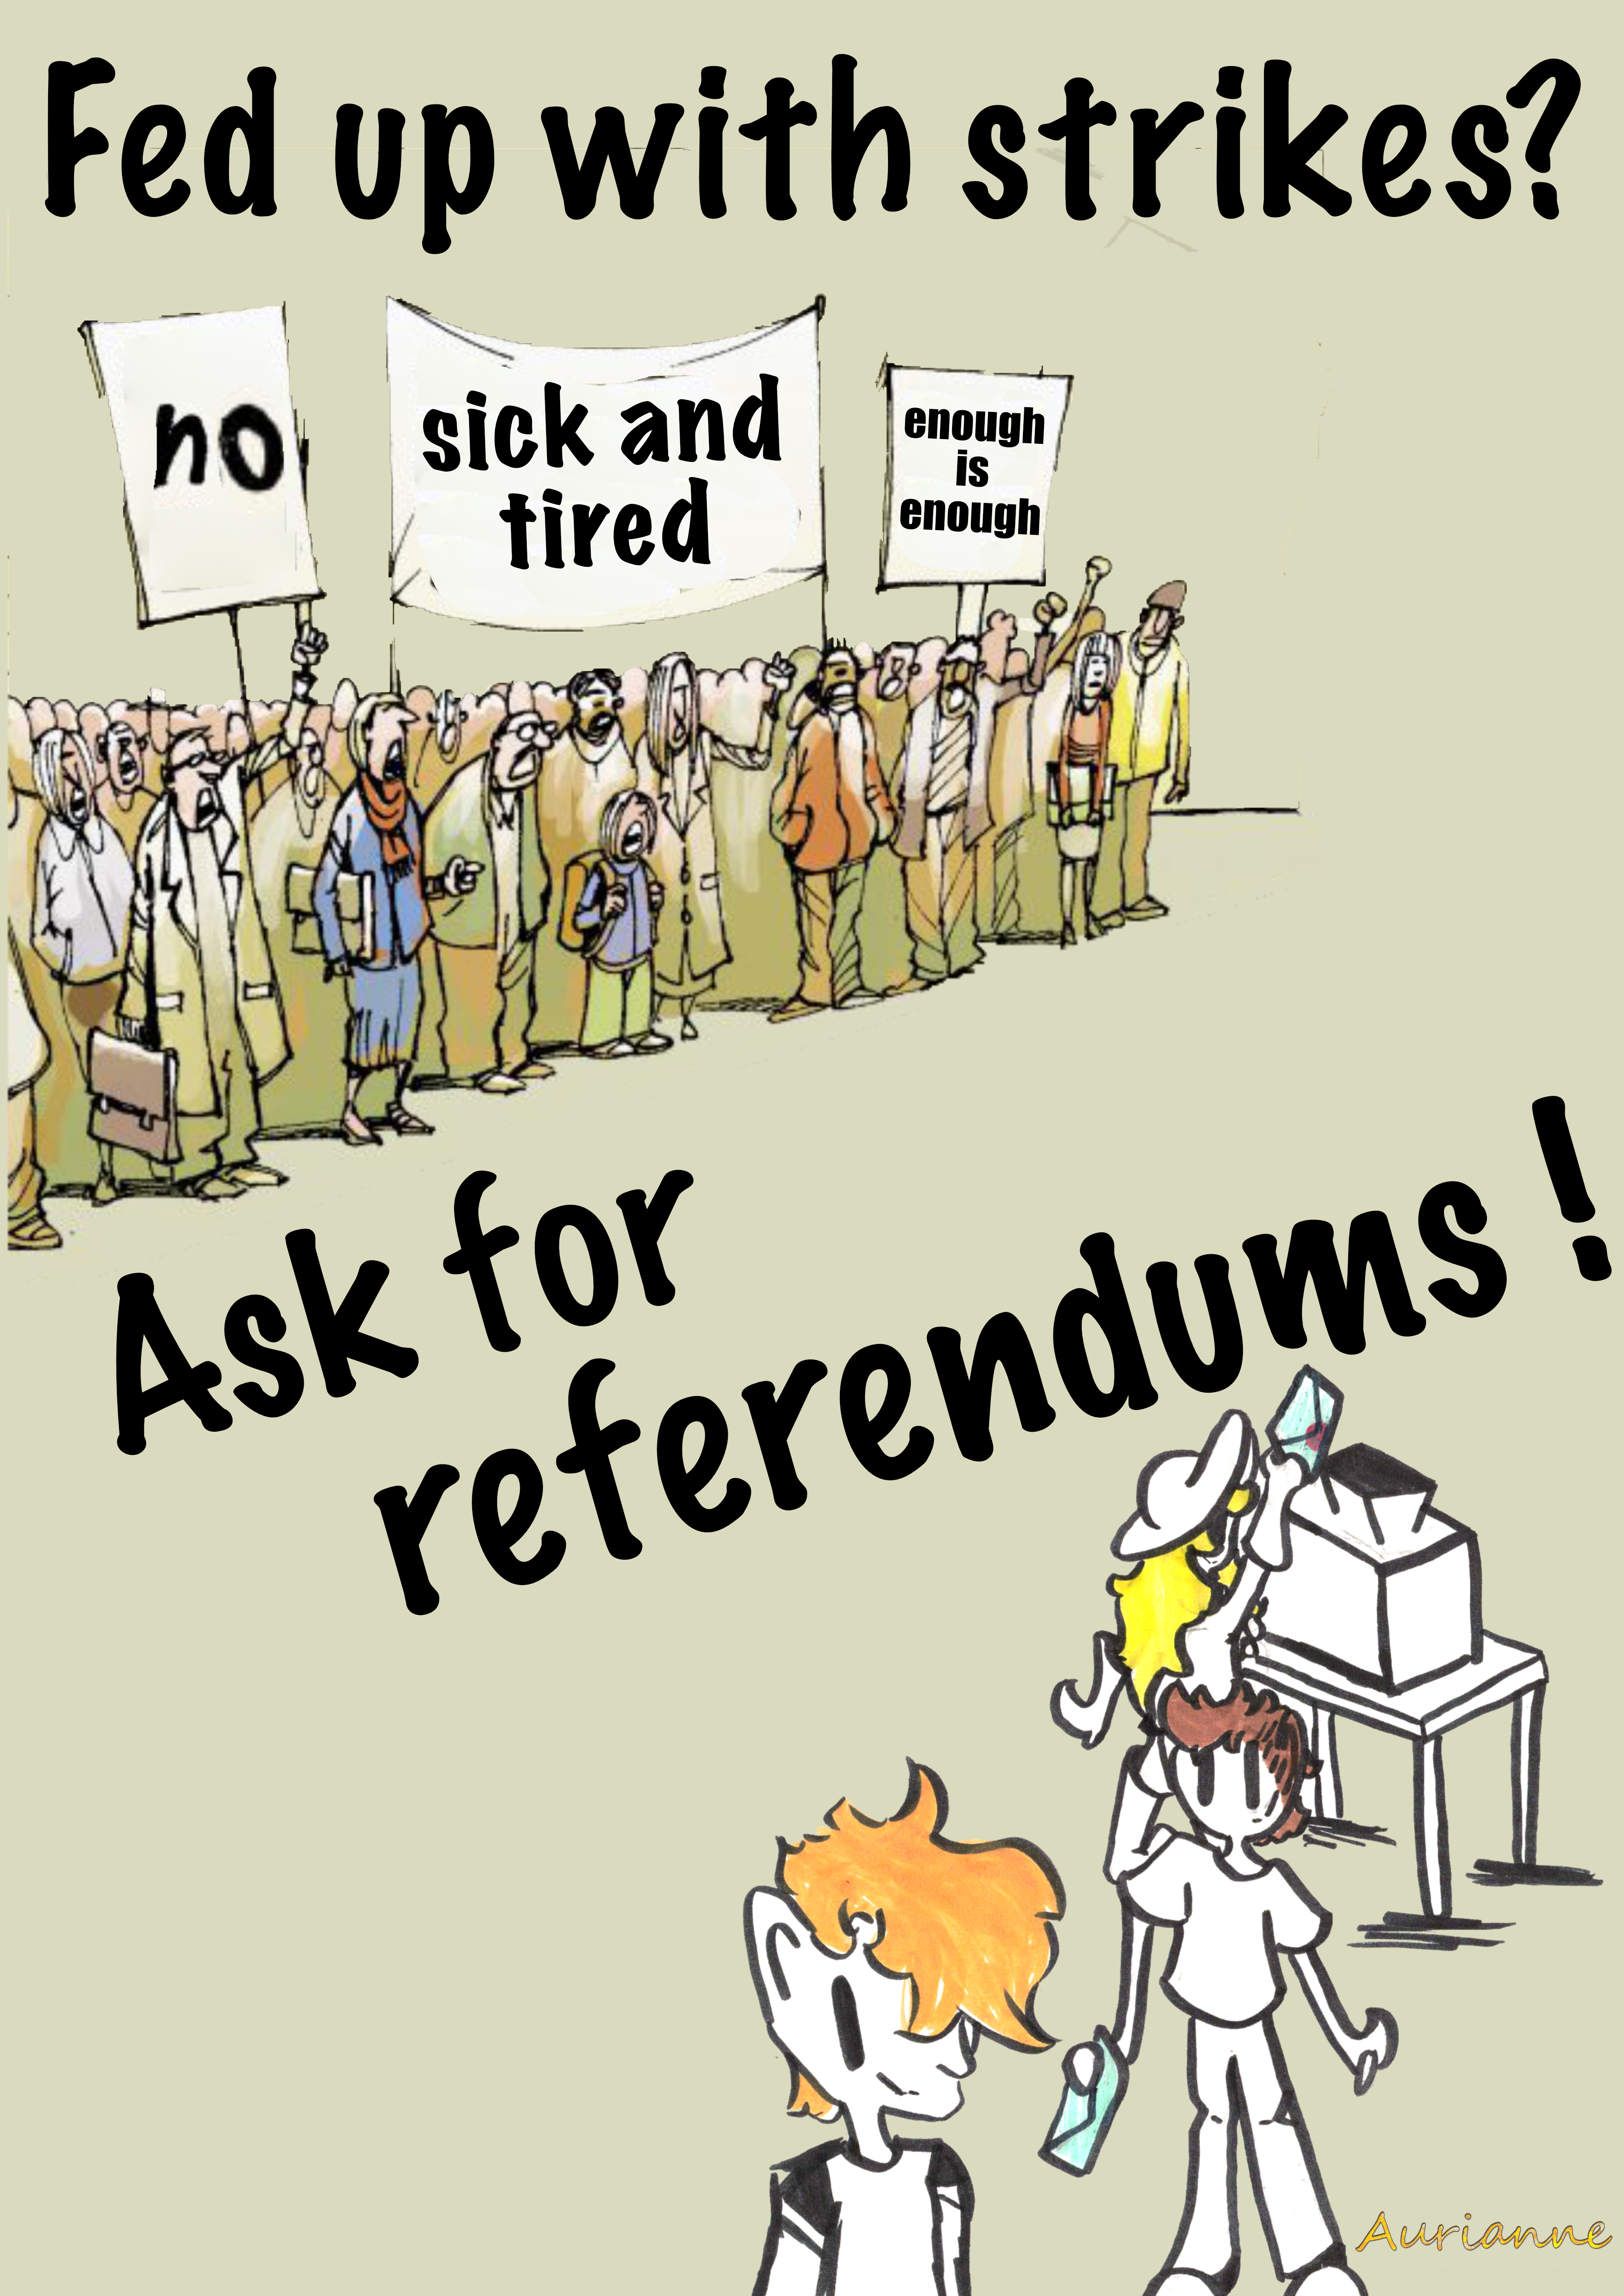 Fed up with strikes? Ask for referendums!